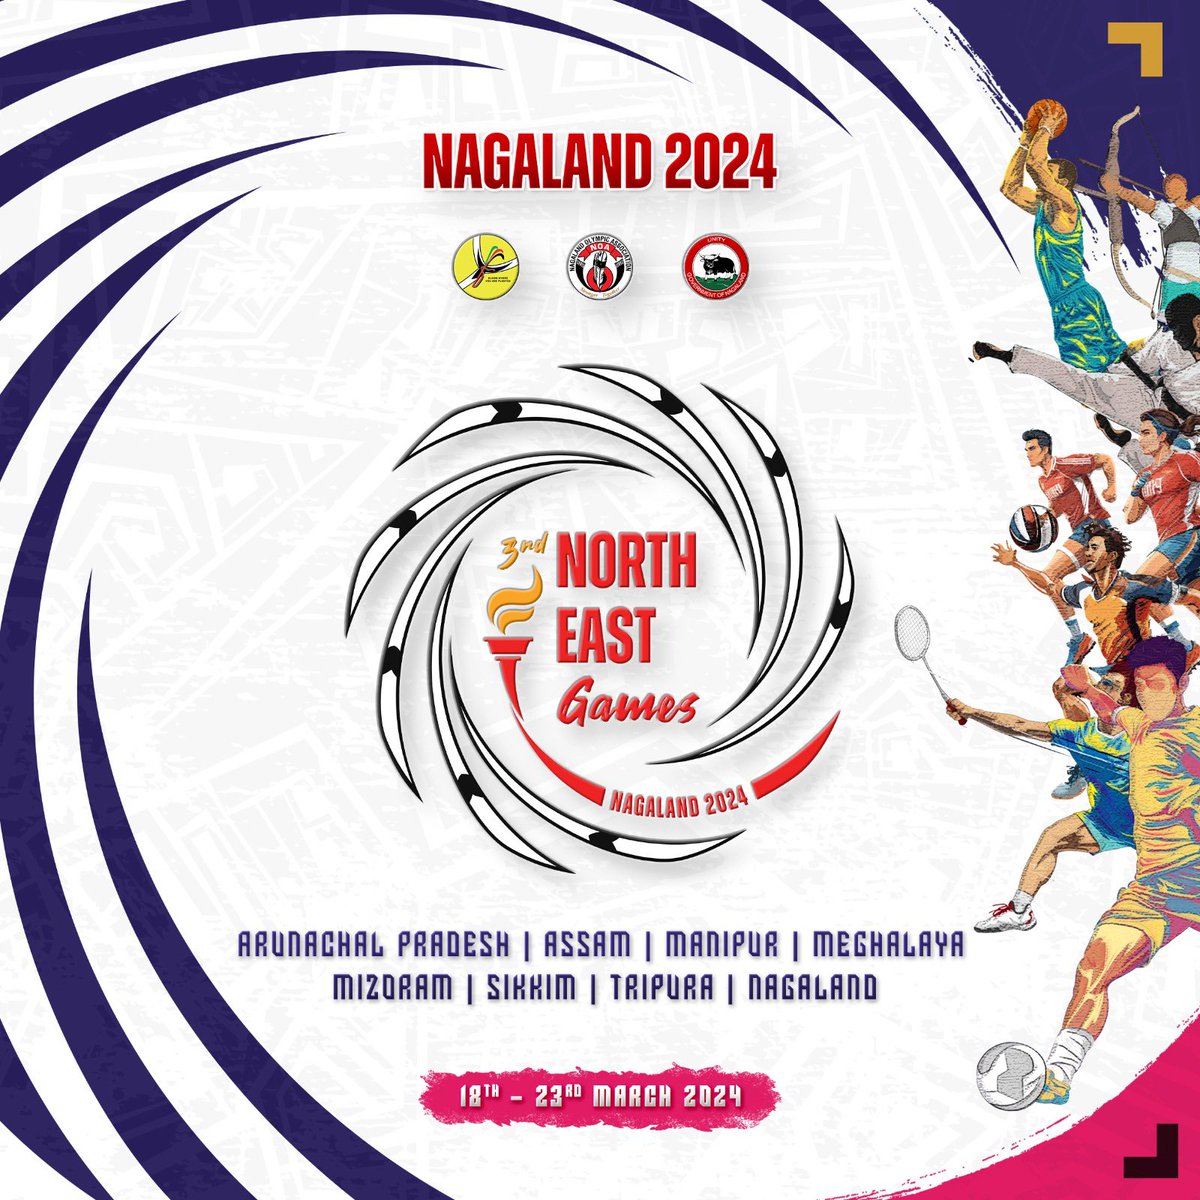 Gear Up for Exciting Sports Action! The 3rd North East Games 2024 begins today in #Nagaland, running from March 18-23, 2024. Athletes from the eight North-Eastern states will compete in 15 diverse sporting disciplines. Watch this interview with Organizing Secretary of North…